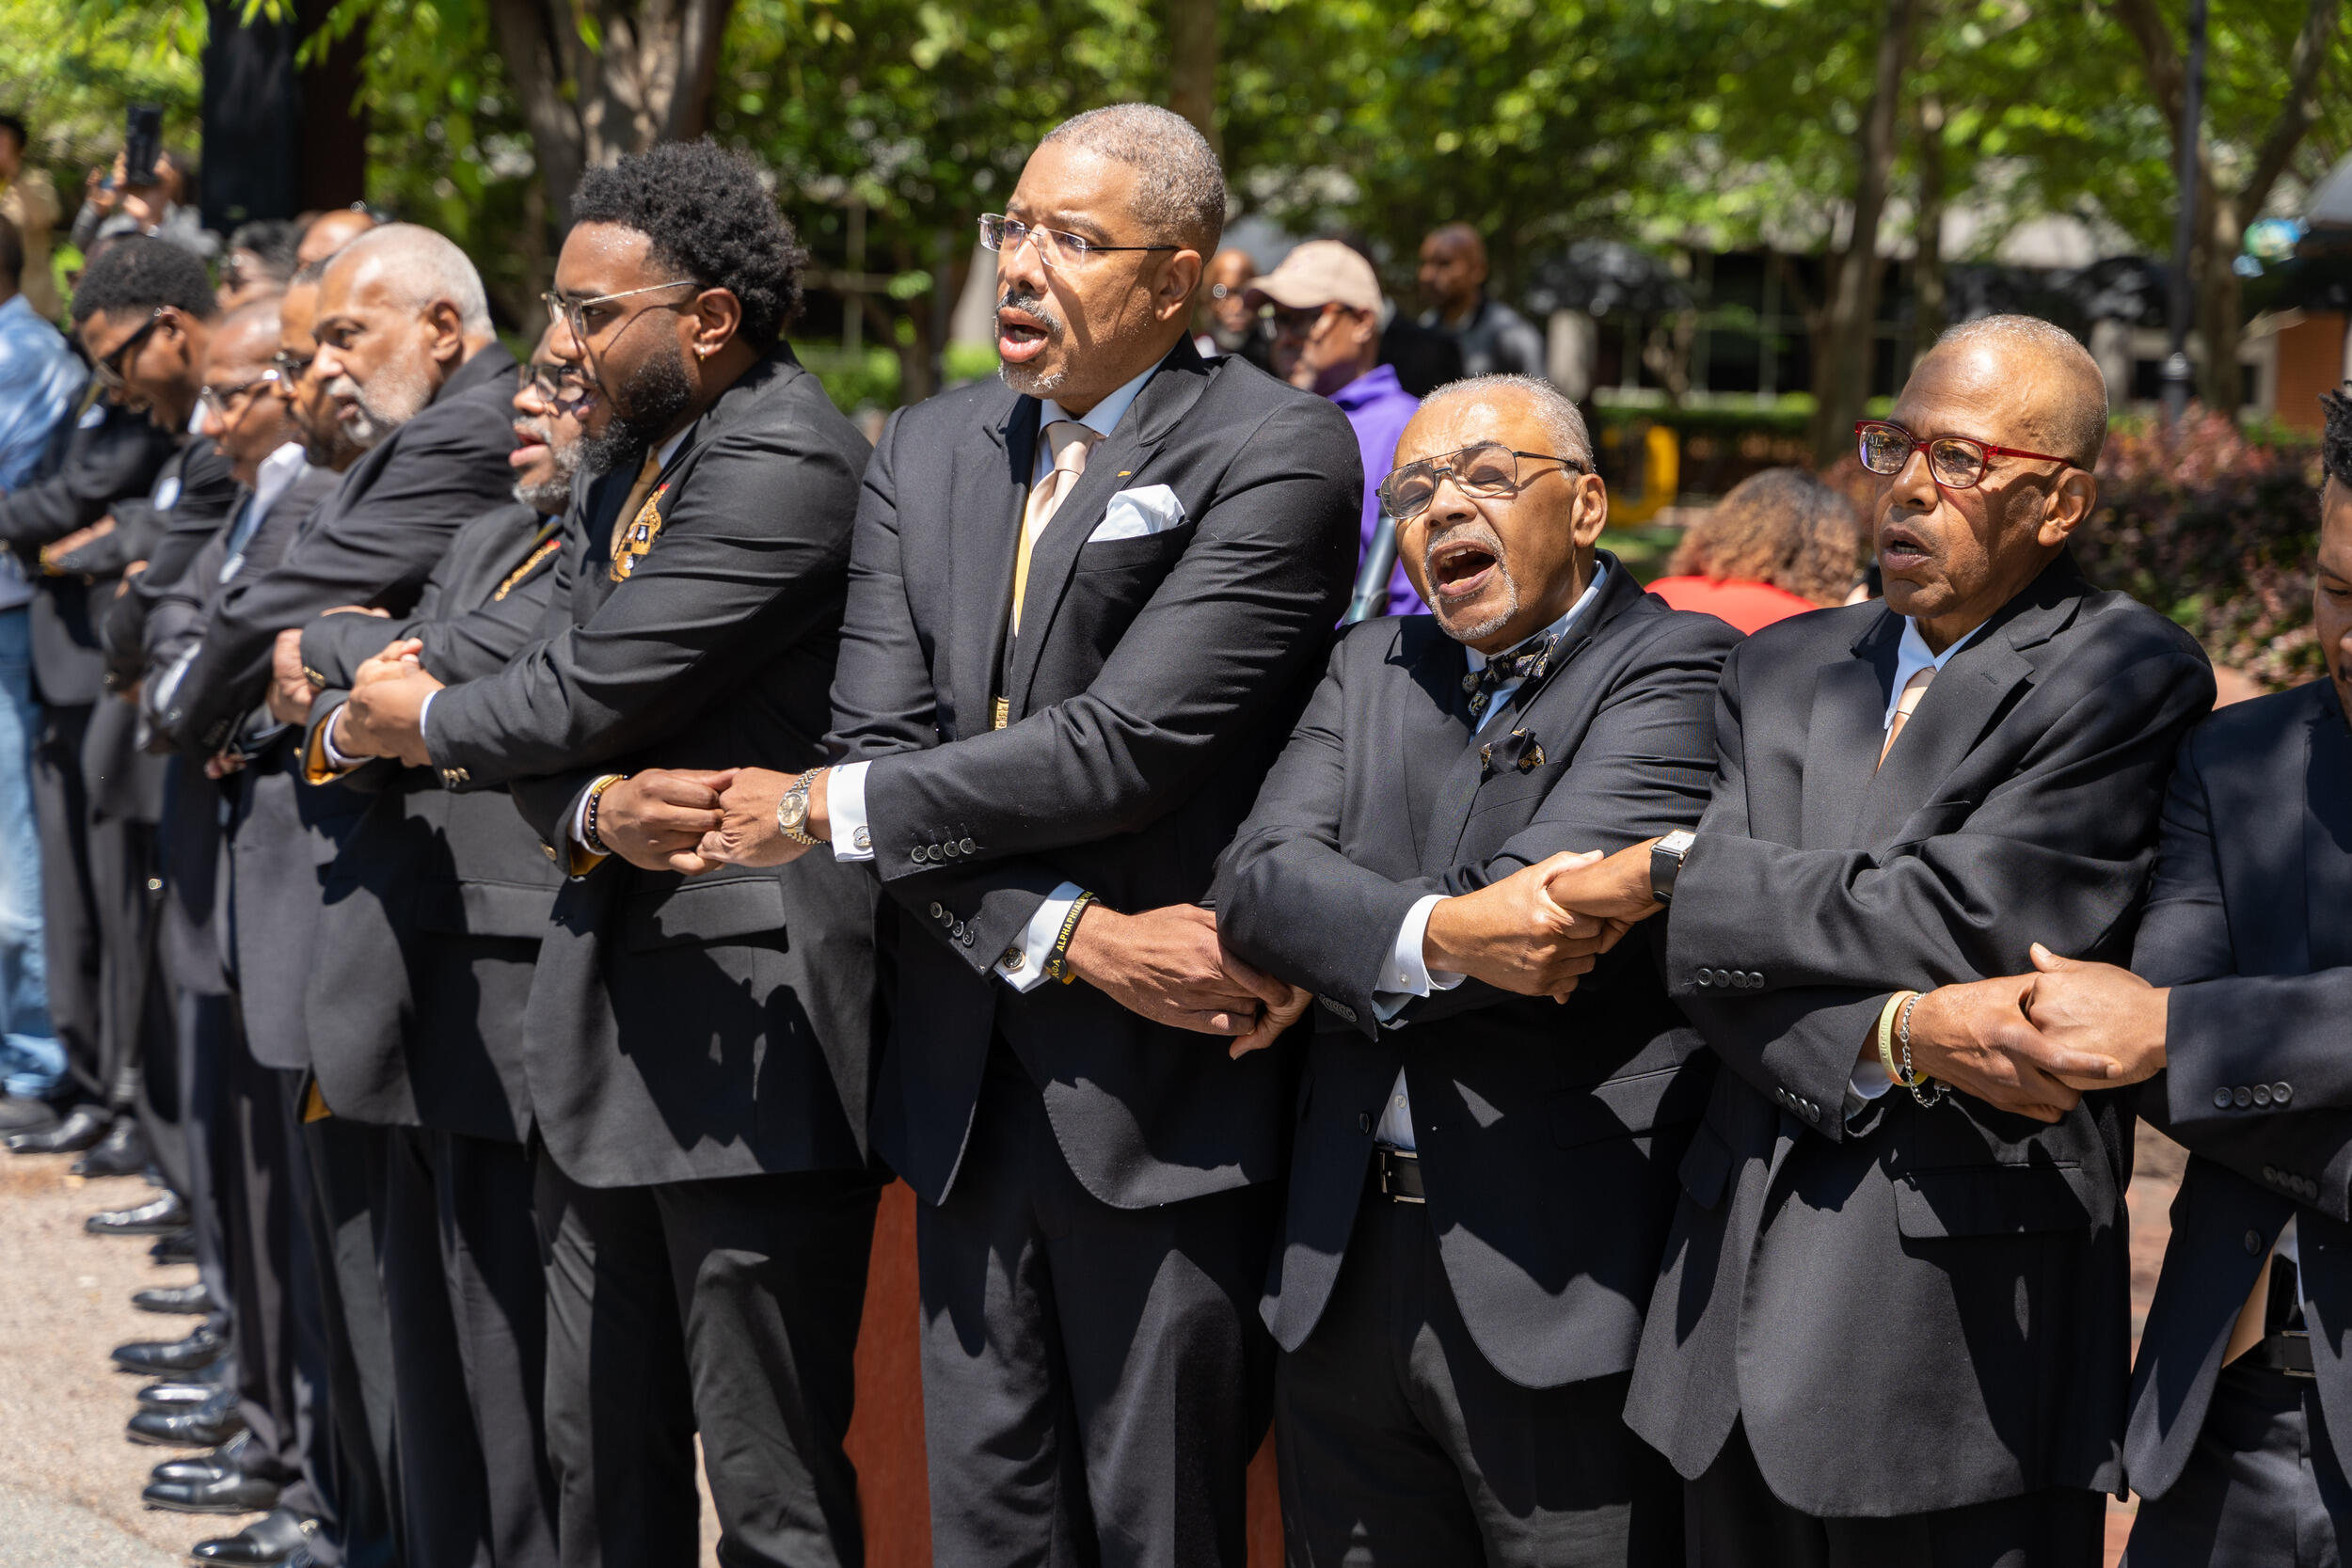 Men in black suits holding hands and singing. 